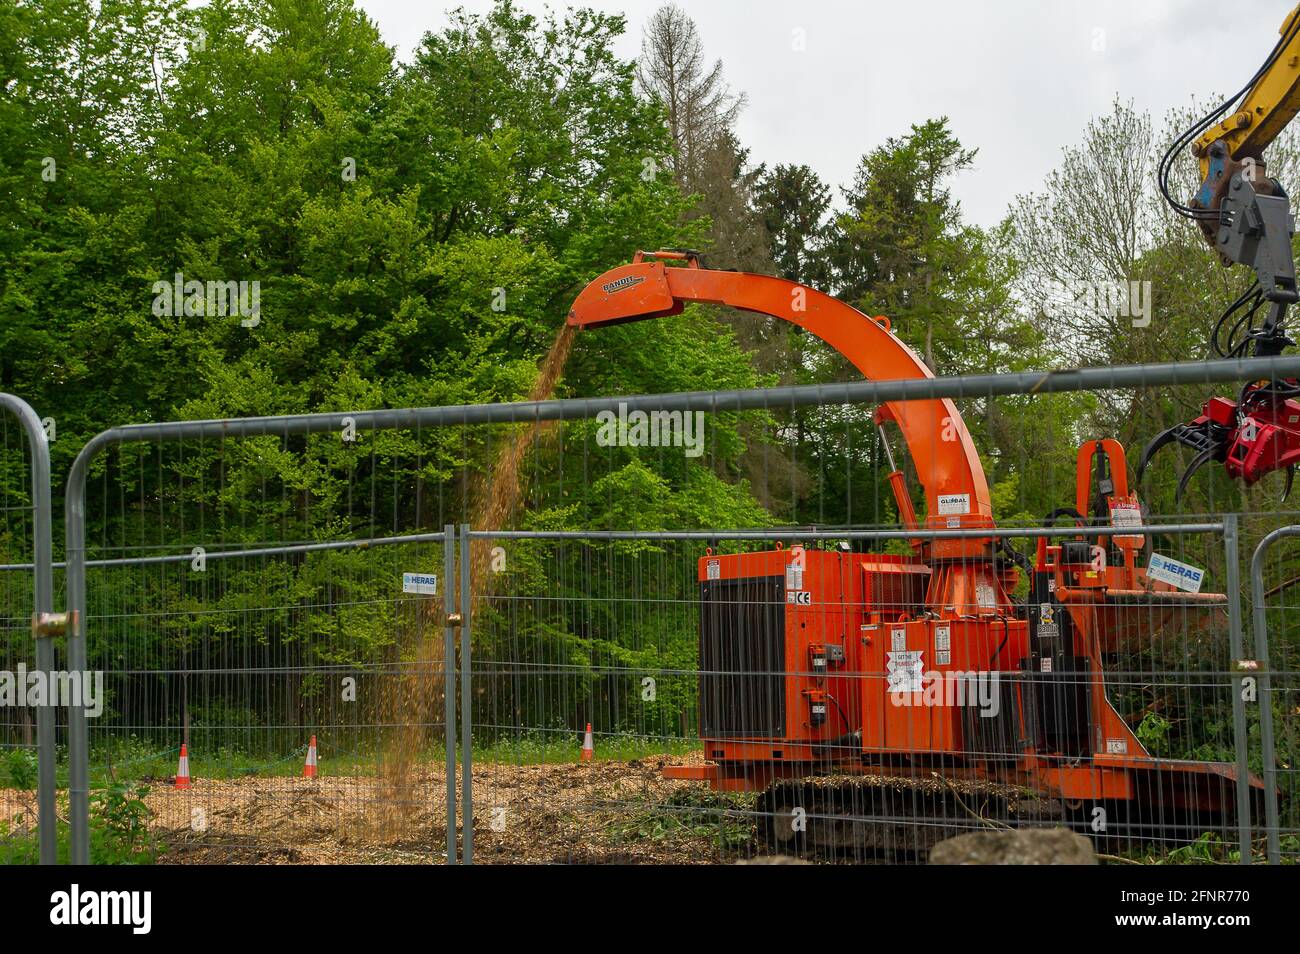 Aylesbury, Buckinghamshire, UK. 18th May, 2021. HS2 were felling mature trees today in Aylesbury. This is causing huge upset amongst locals and environmentalists who have allegedly witnessed nesting birds feeding their young in the trees that HS2 are felling. Under the Wildlife and Countryside Act 1981 it is illegal to intentionally or recklessly disturb wild birds or a nest containing eggs or young. Credit: Maureen McLean/Alamy Stock Photo